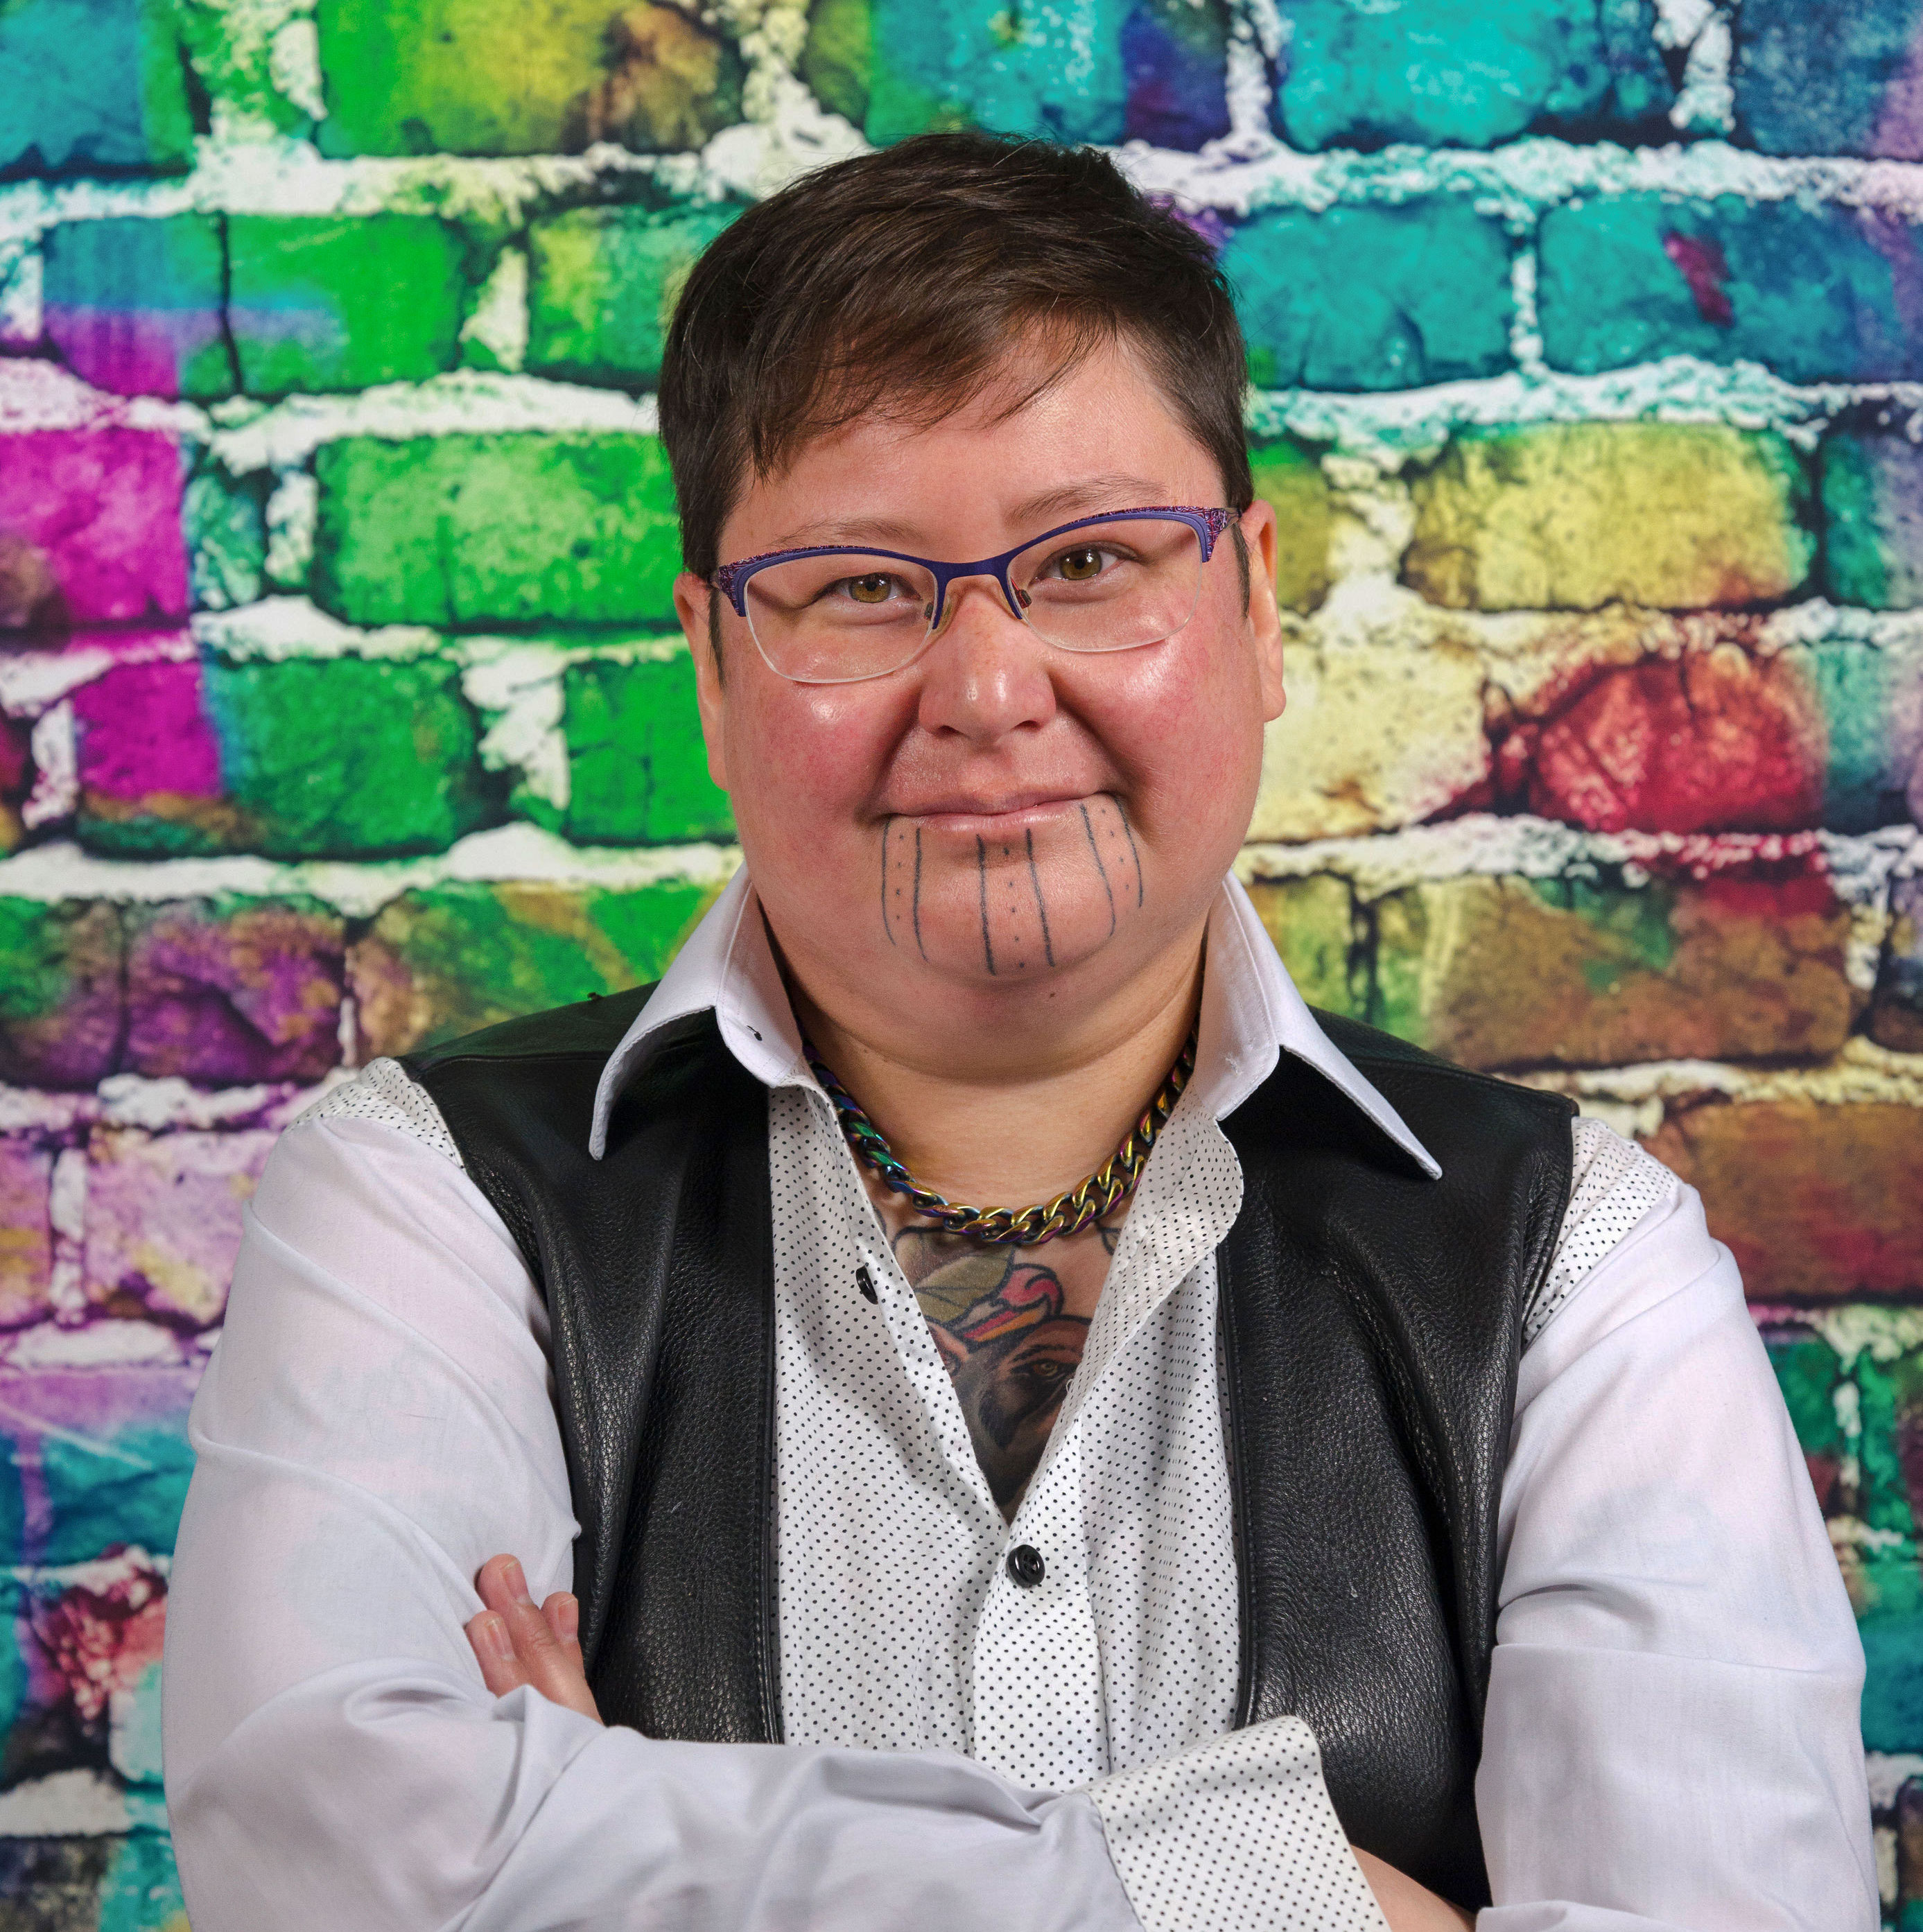 TJ has light skin, short hair, glasses, and three vertical lines tattooed on his chin. He stands in front of a rainbow brick wall wearing a light button-down shirt and a leather vest.